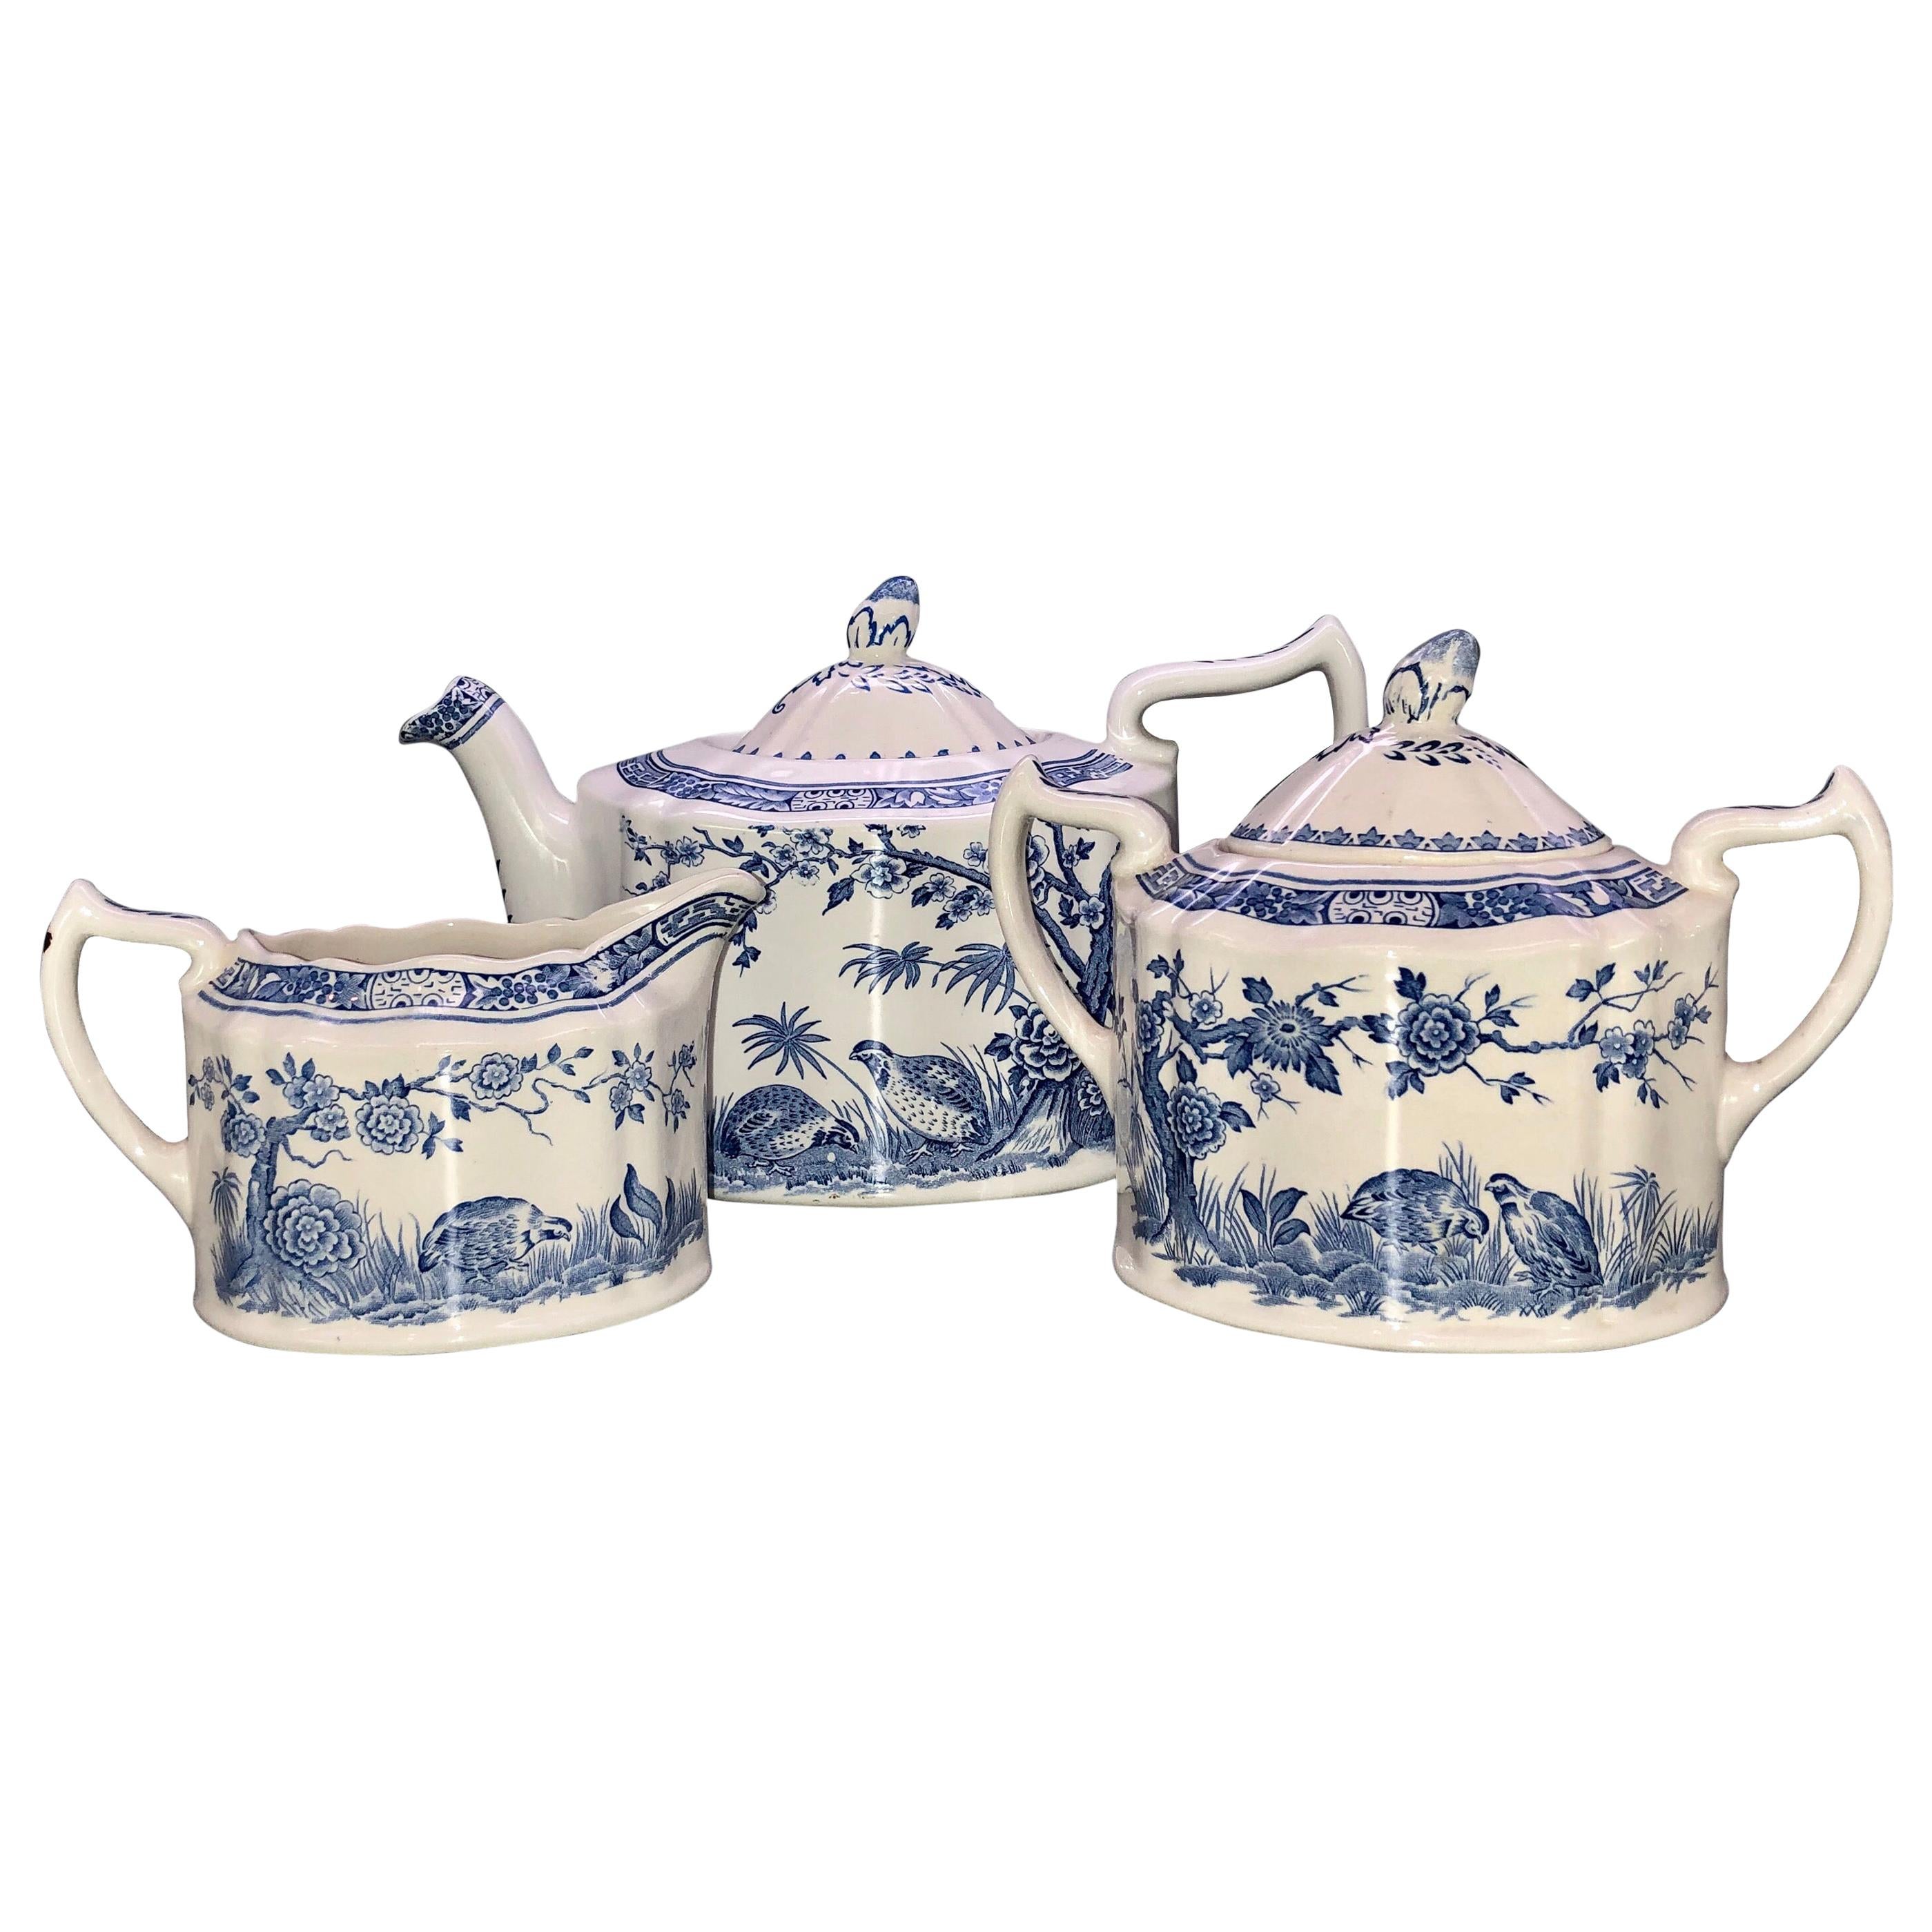 Blue and White Furnivals Quail 1913 Pottery Teapot, Creamer and Sugar Bowl Set For Sale